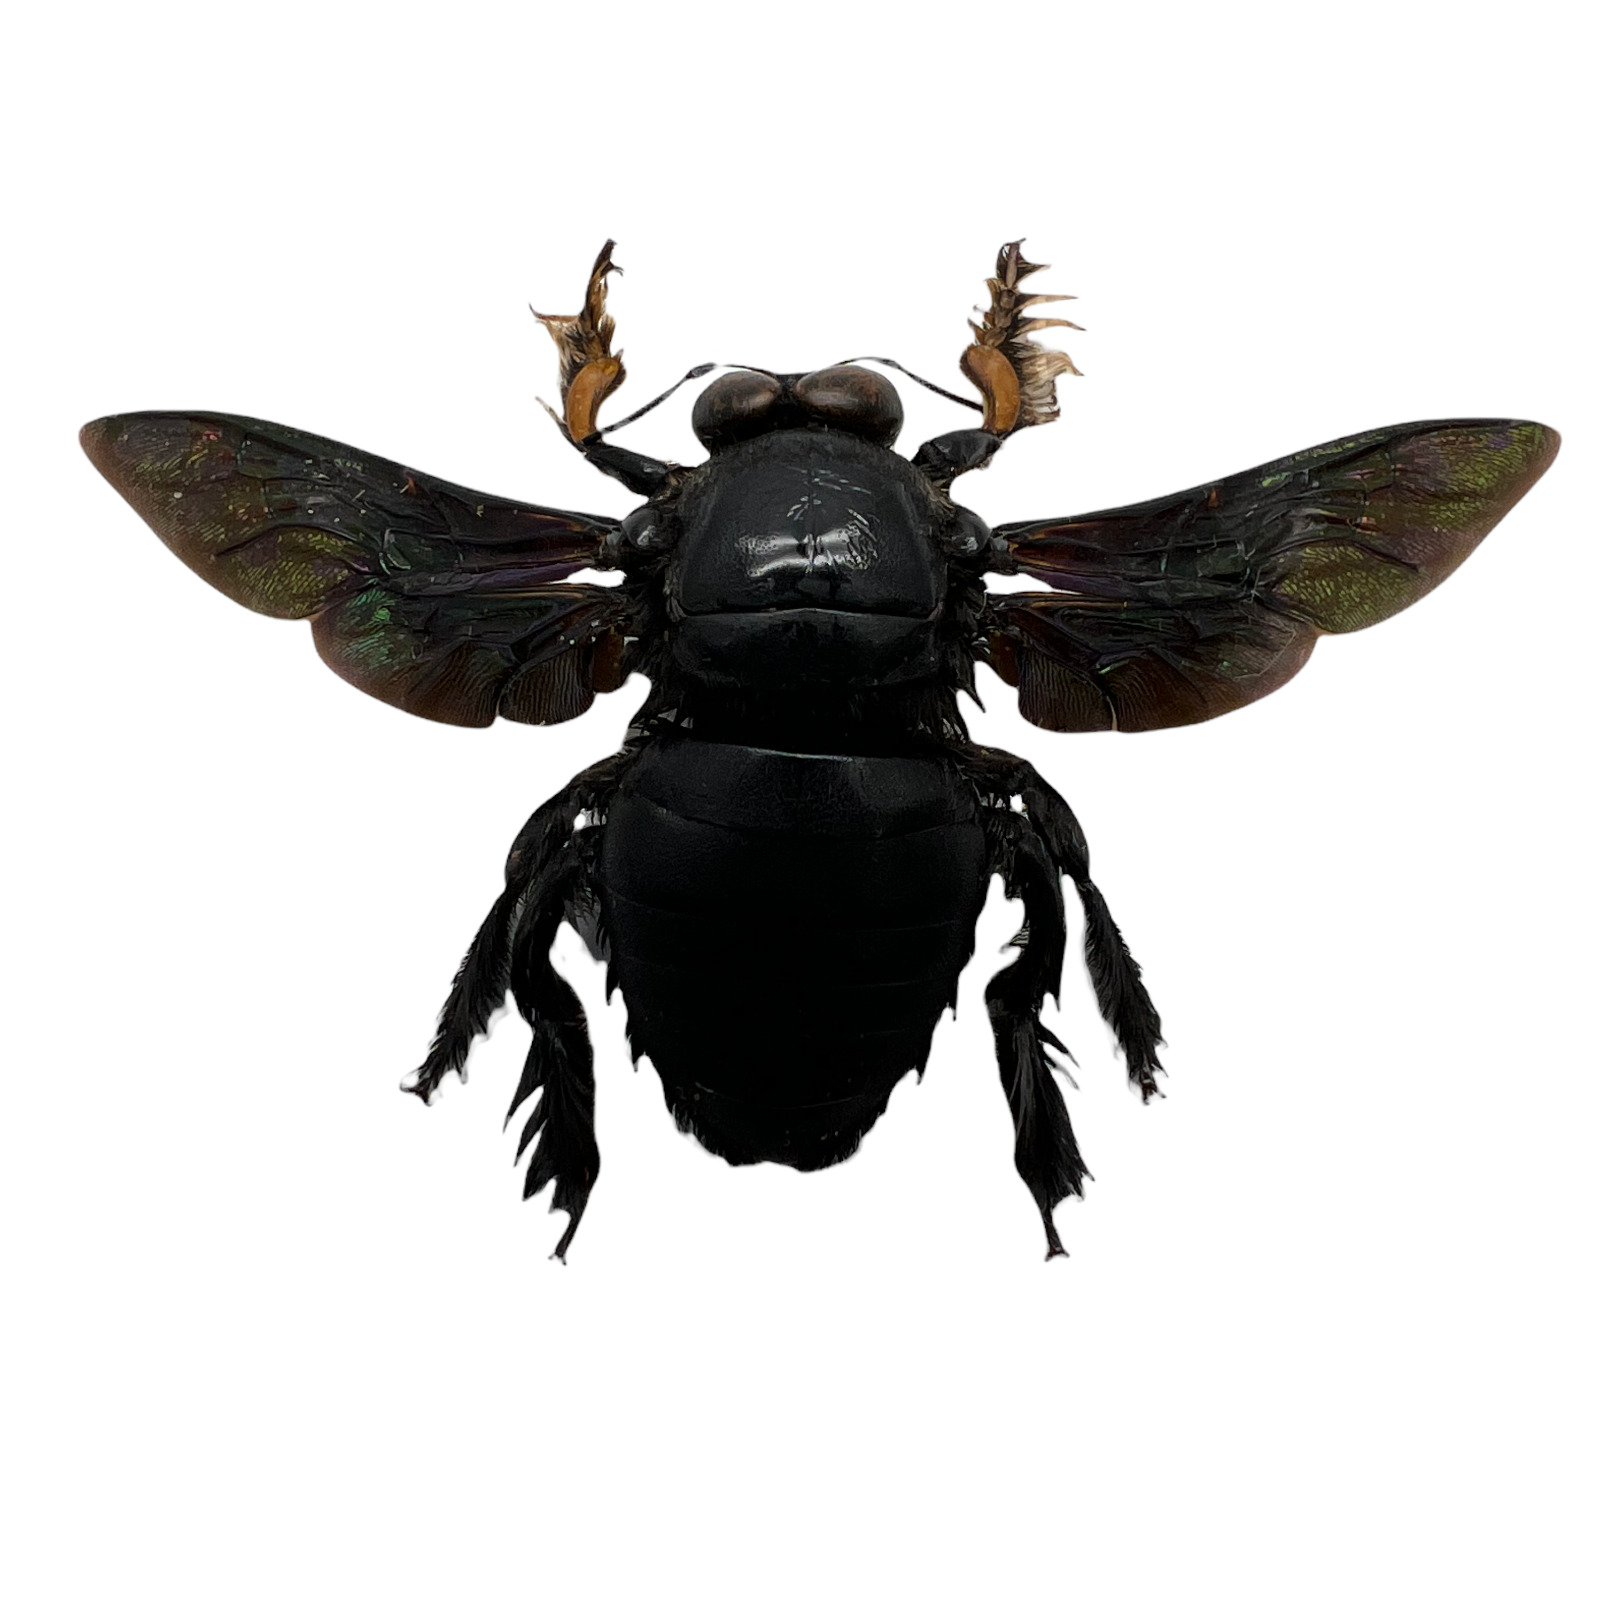 Giant Black Tropical Carpenter Bee Xylocopa Latipes Insect Specimen (M)